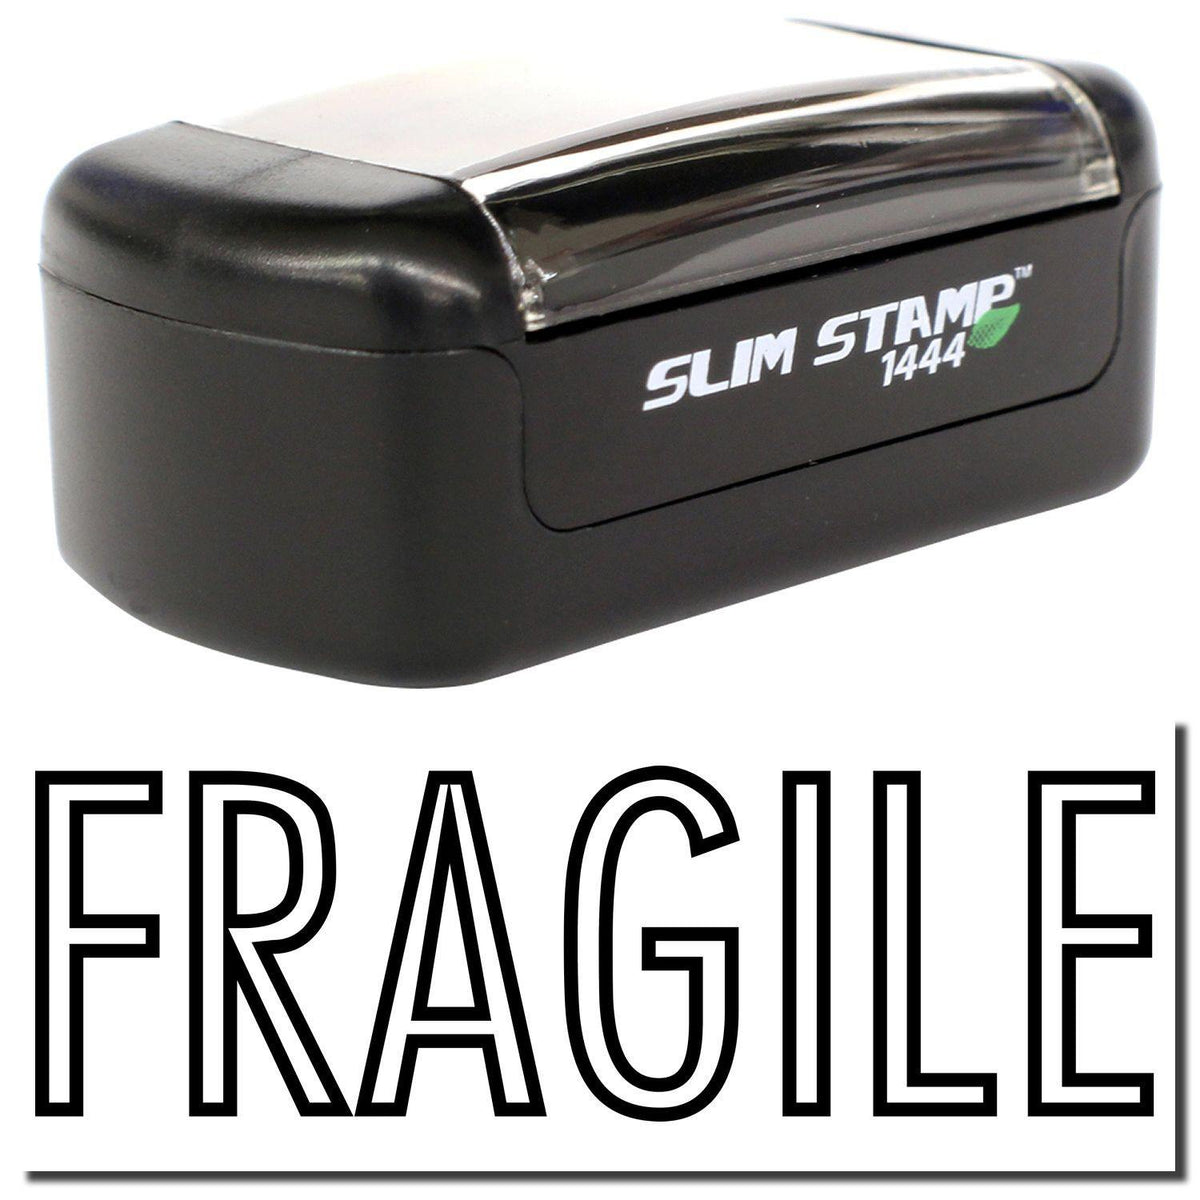 A stock office pre-inked stamp with a stamped image showing how the text &quot;FRAGILE&quot; in an outline font is displayed after stamping.